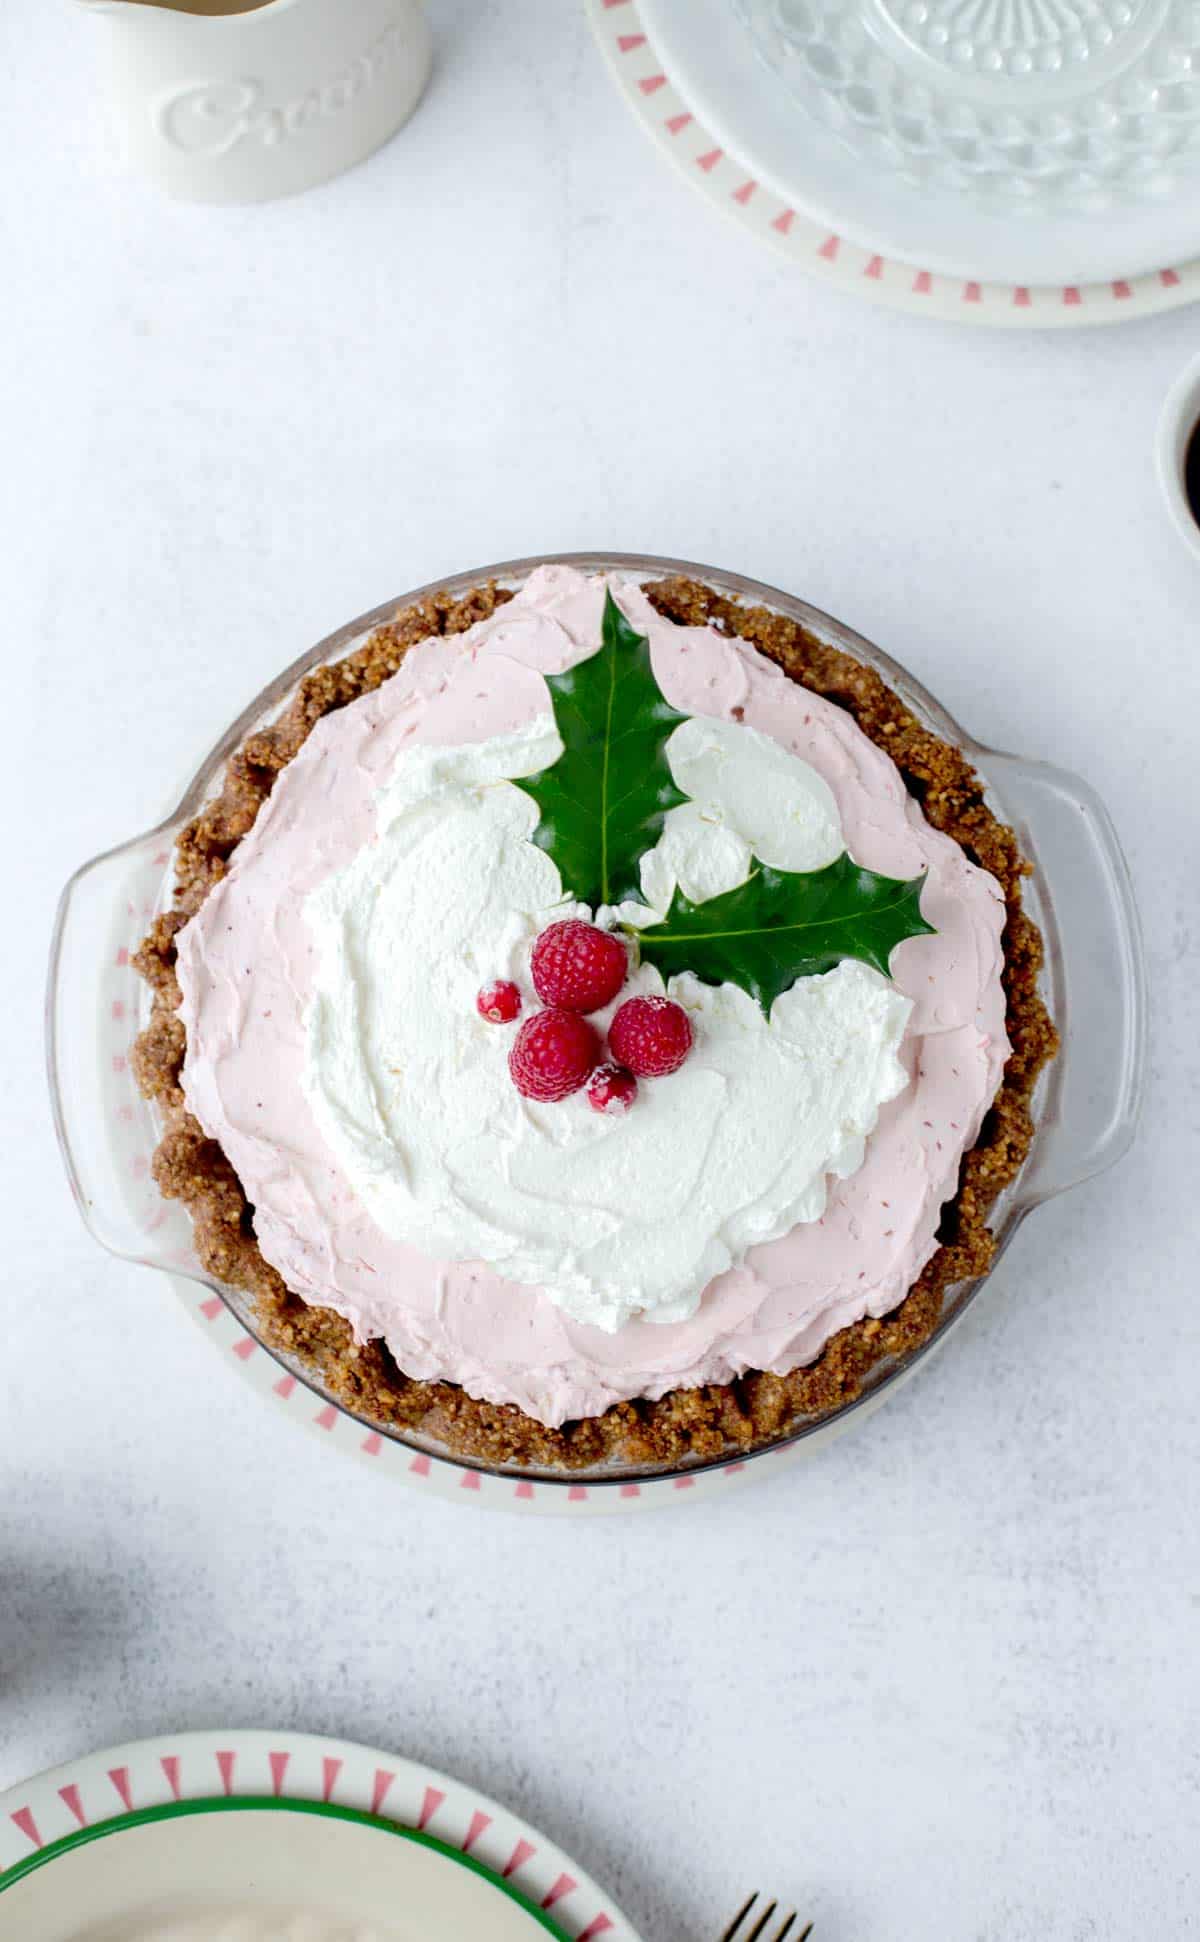 Creamy Cranberry Pie is a cranberry pie recipe with a mix of sweet tart berries and freshly whipped cream in a toasted gluten free pecan pie crust.  gluten free christmas desserts | cranberry pie | cranberry pie recipe | cranberry cream pie recipe